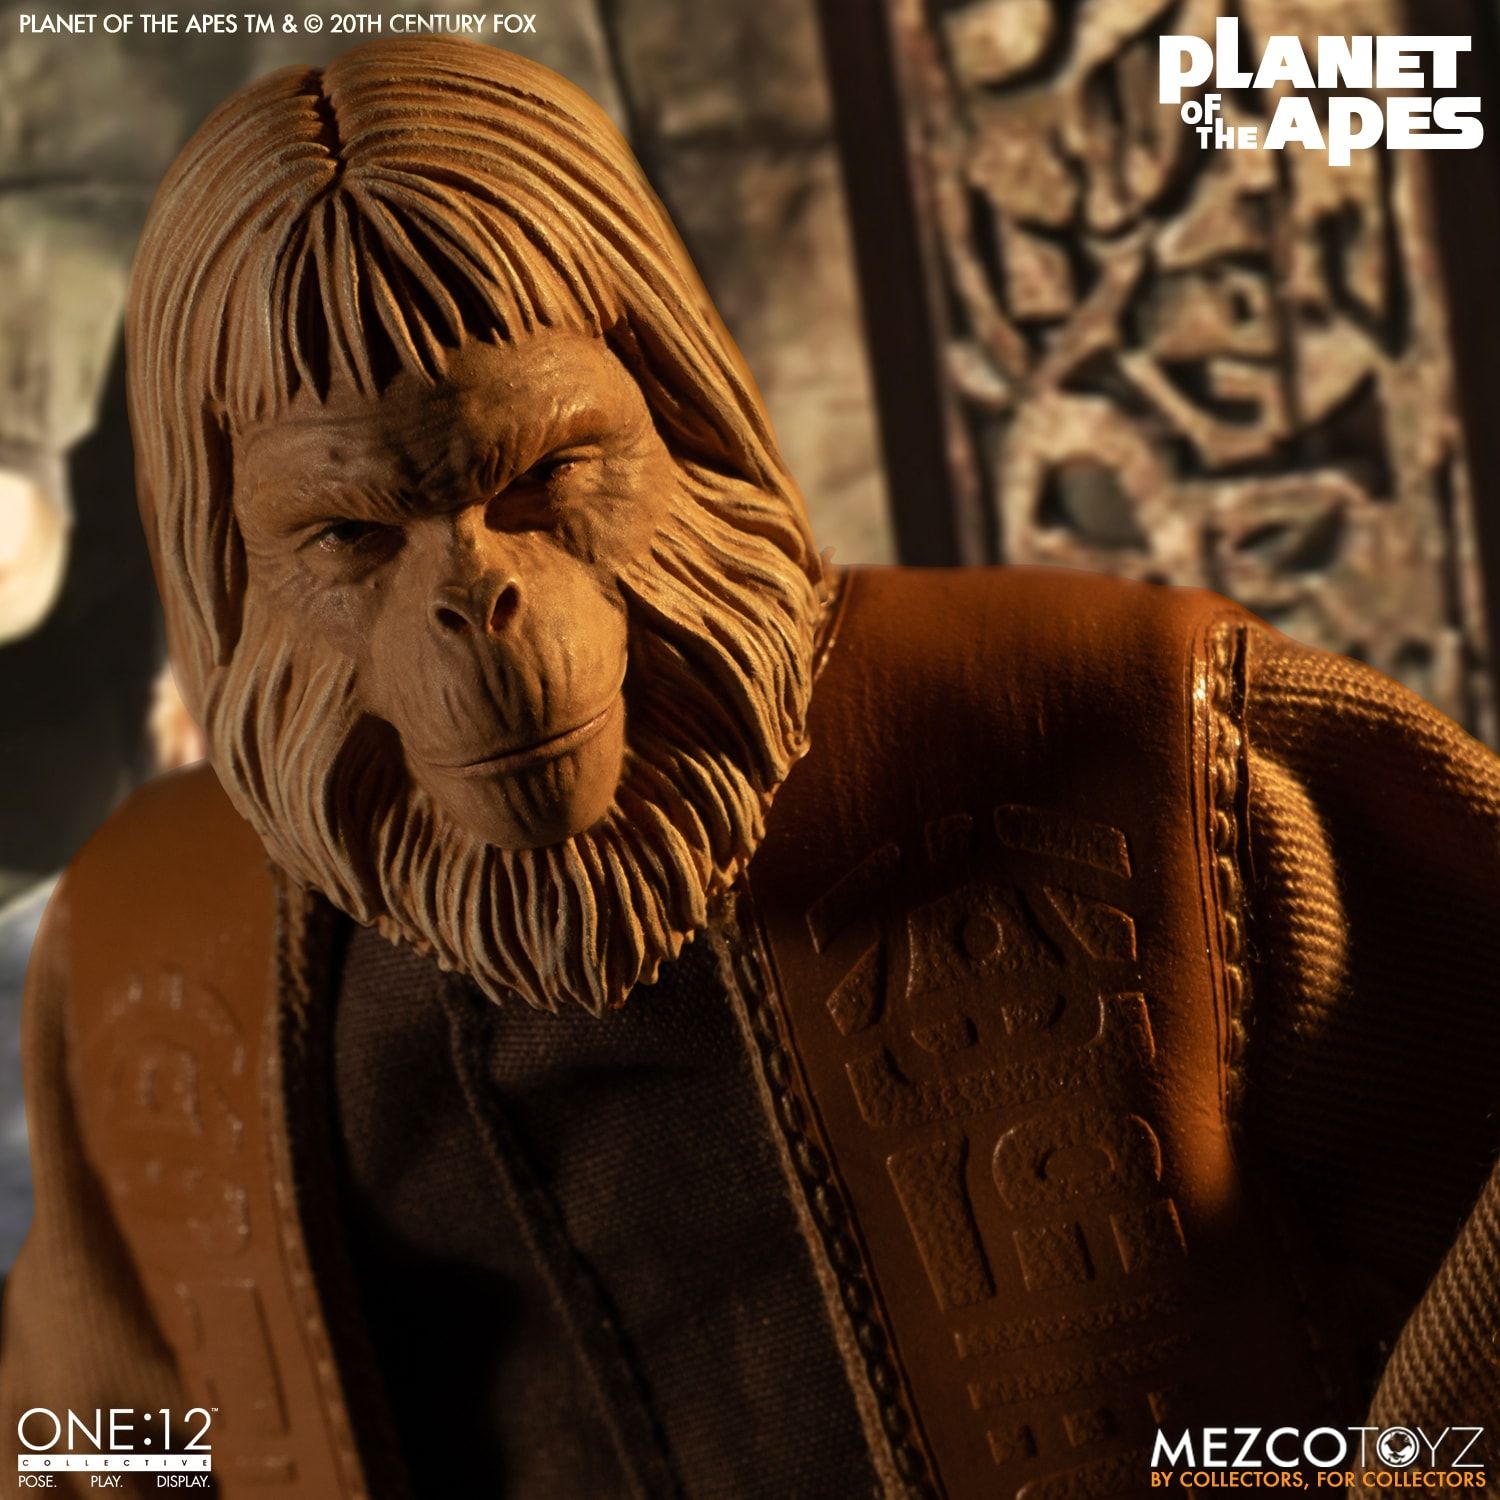 New Product: Mezco Planet of the Apes Dr. Zaius 8346